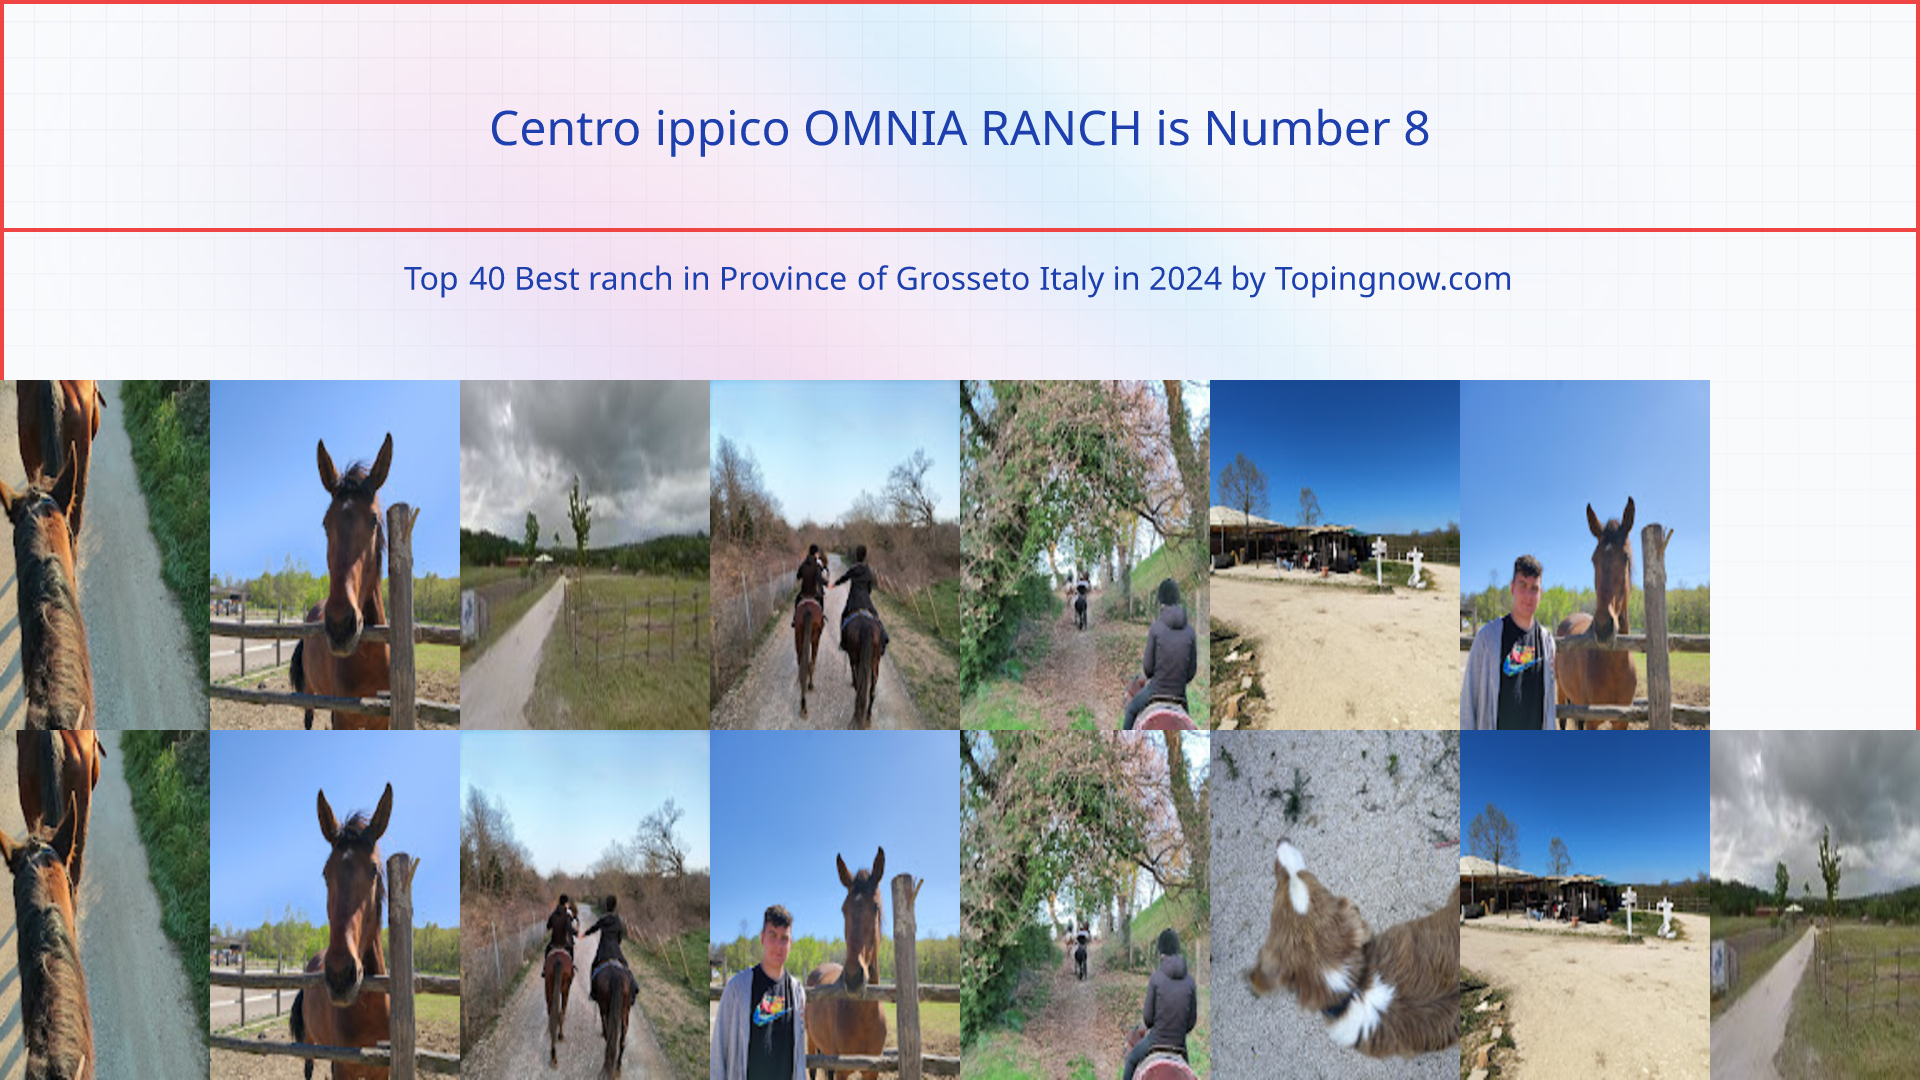 Centro ippico OMNIA RANCH: Top 40 Best ranch in Province of Grosseto Italy in 2024